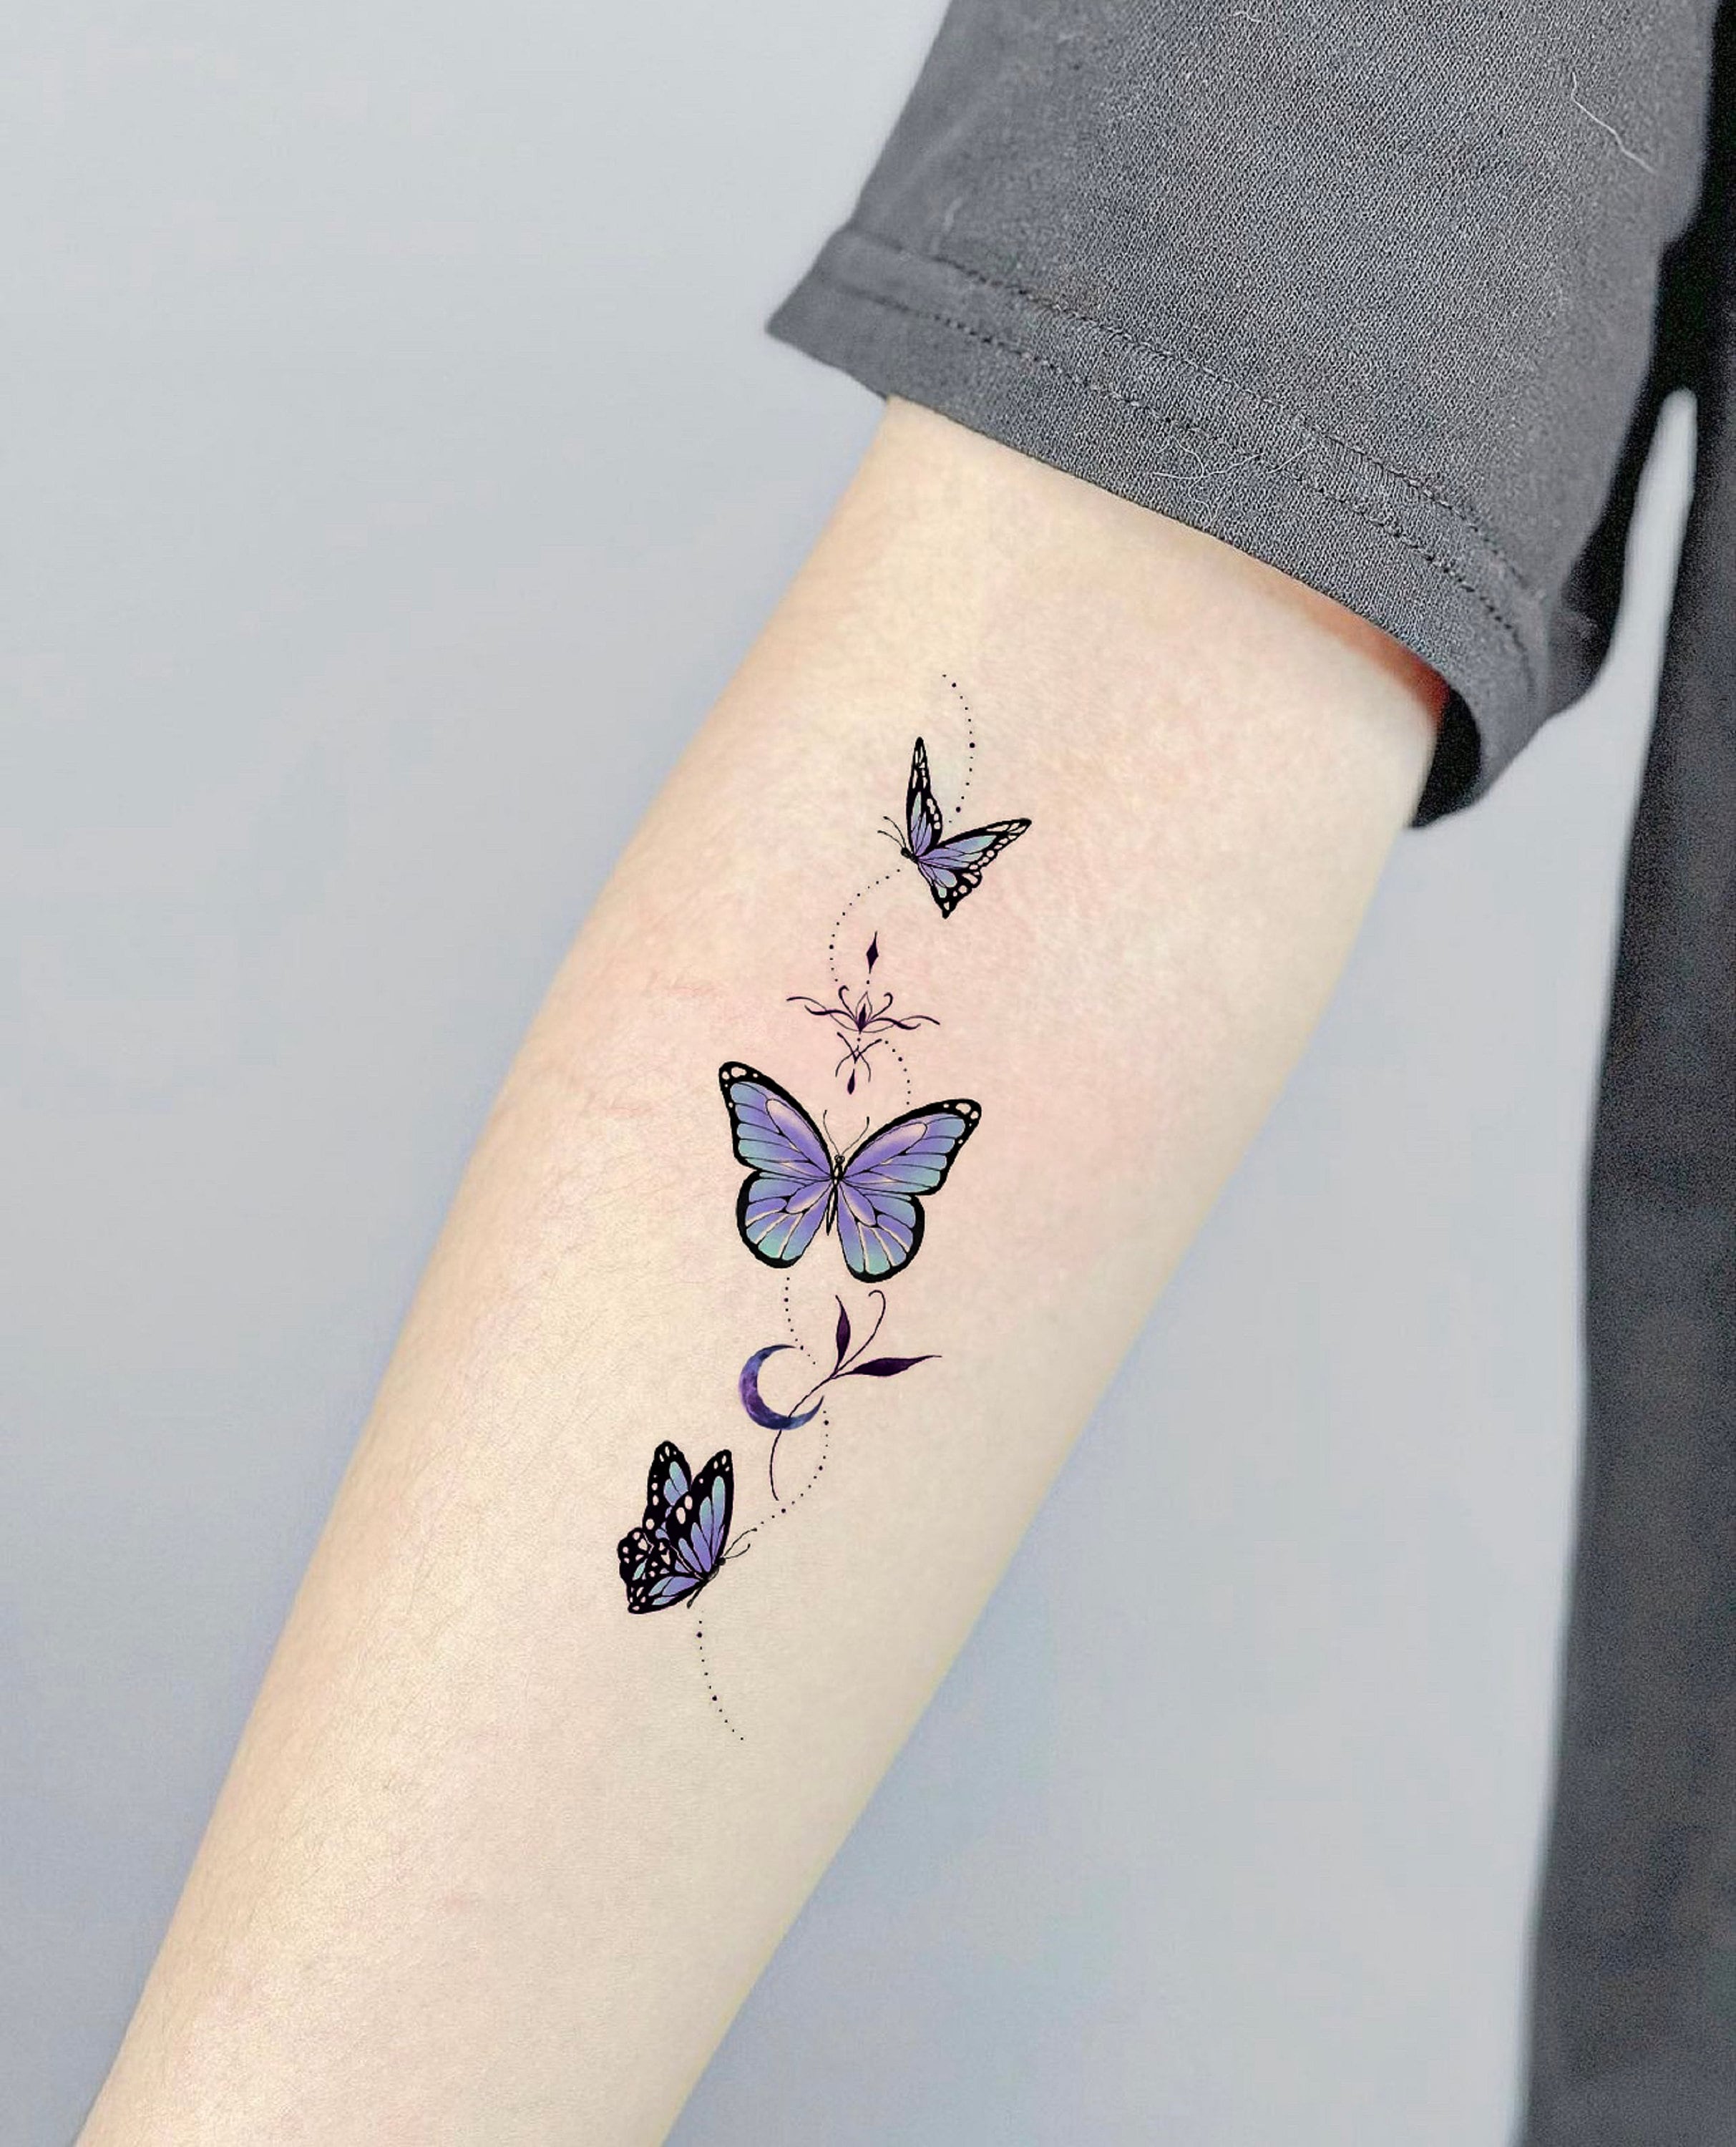 Butterfly Temporary Tattoo Butterfly Tattoo Fake Tattoo picture pic picture